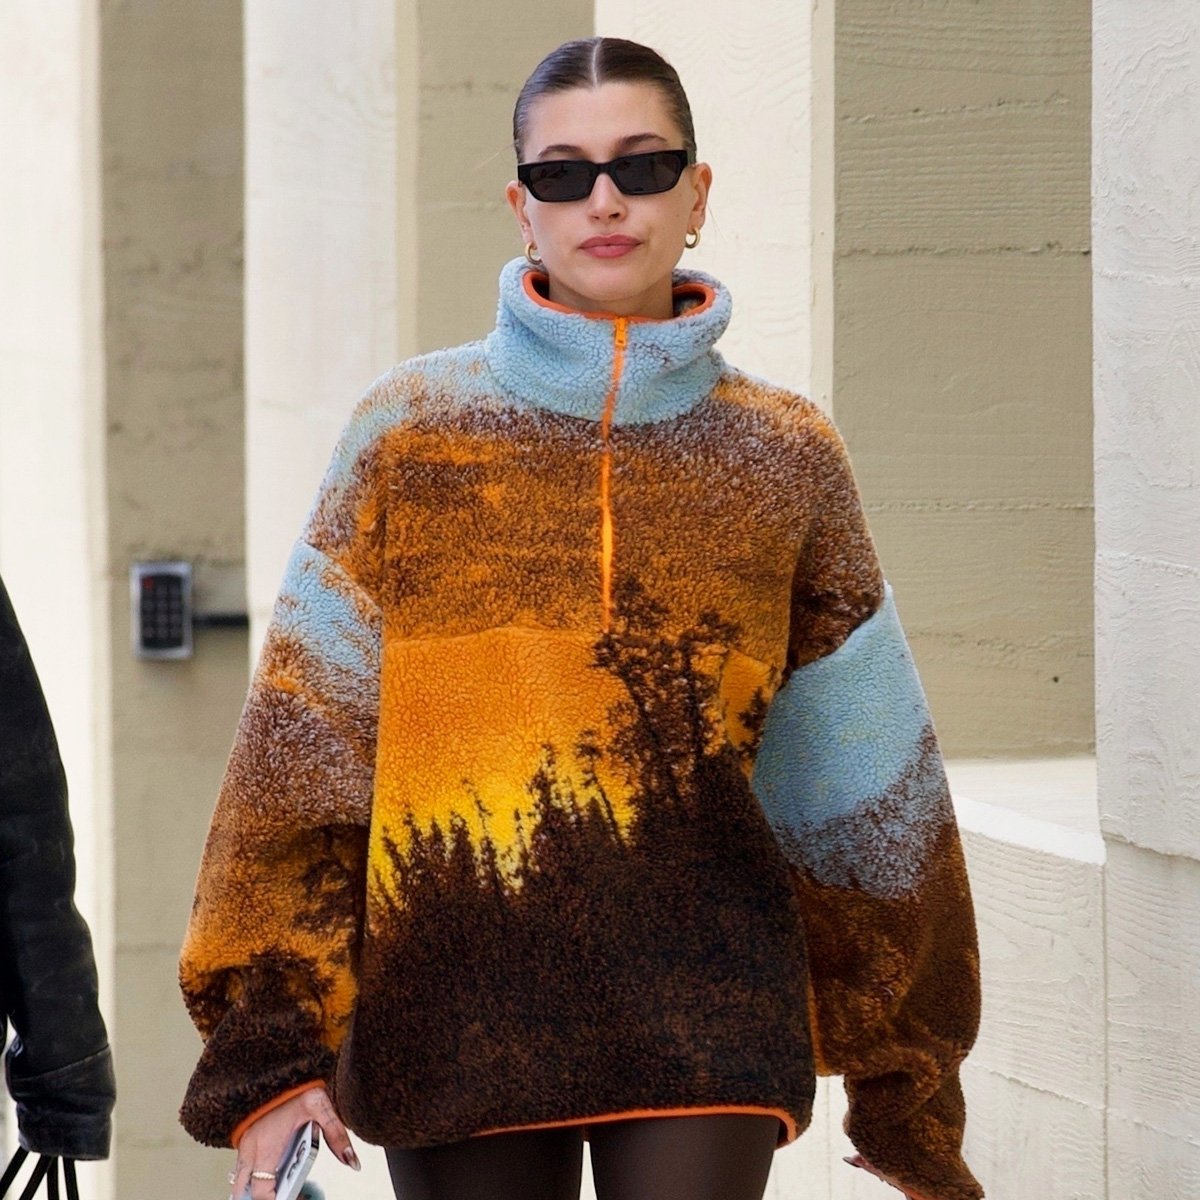 Hailey Bieber Stays Cozy in a Patterned Fleece During a Day Out in NYC:  Photo 4713541, Hailey Bieber Photos